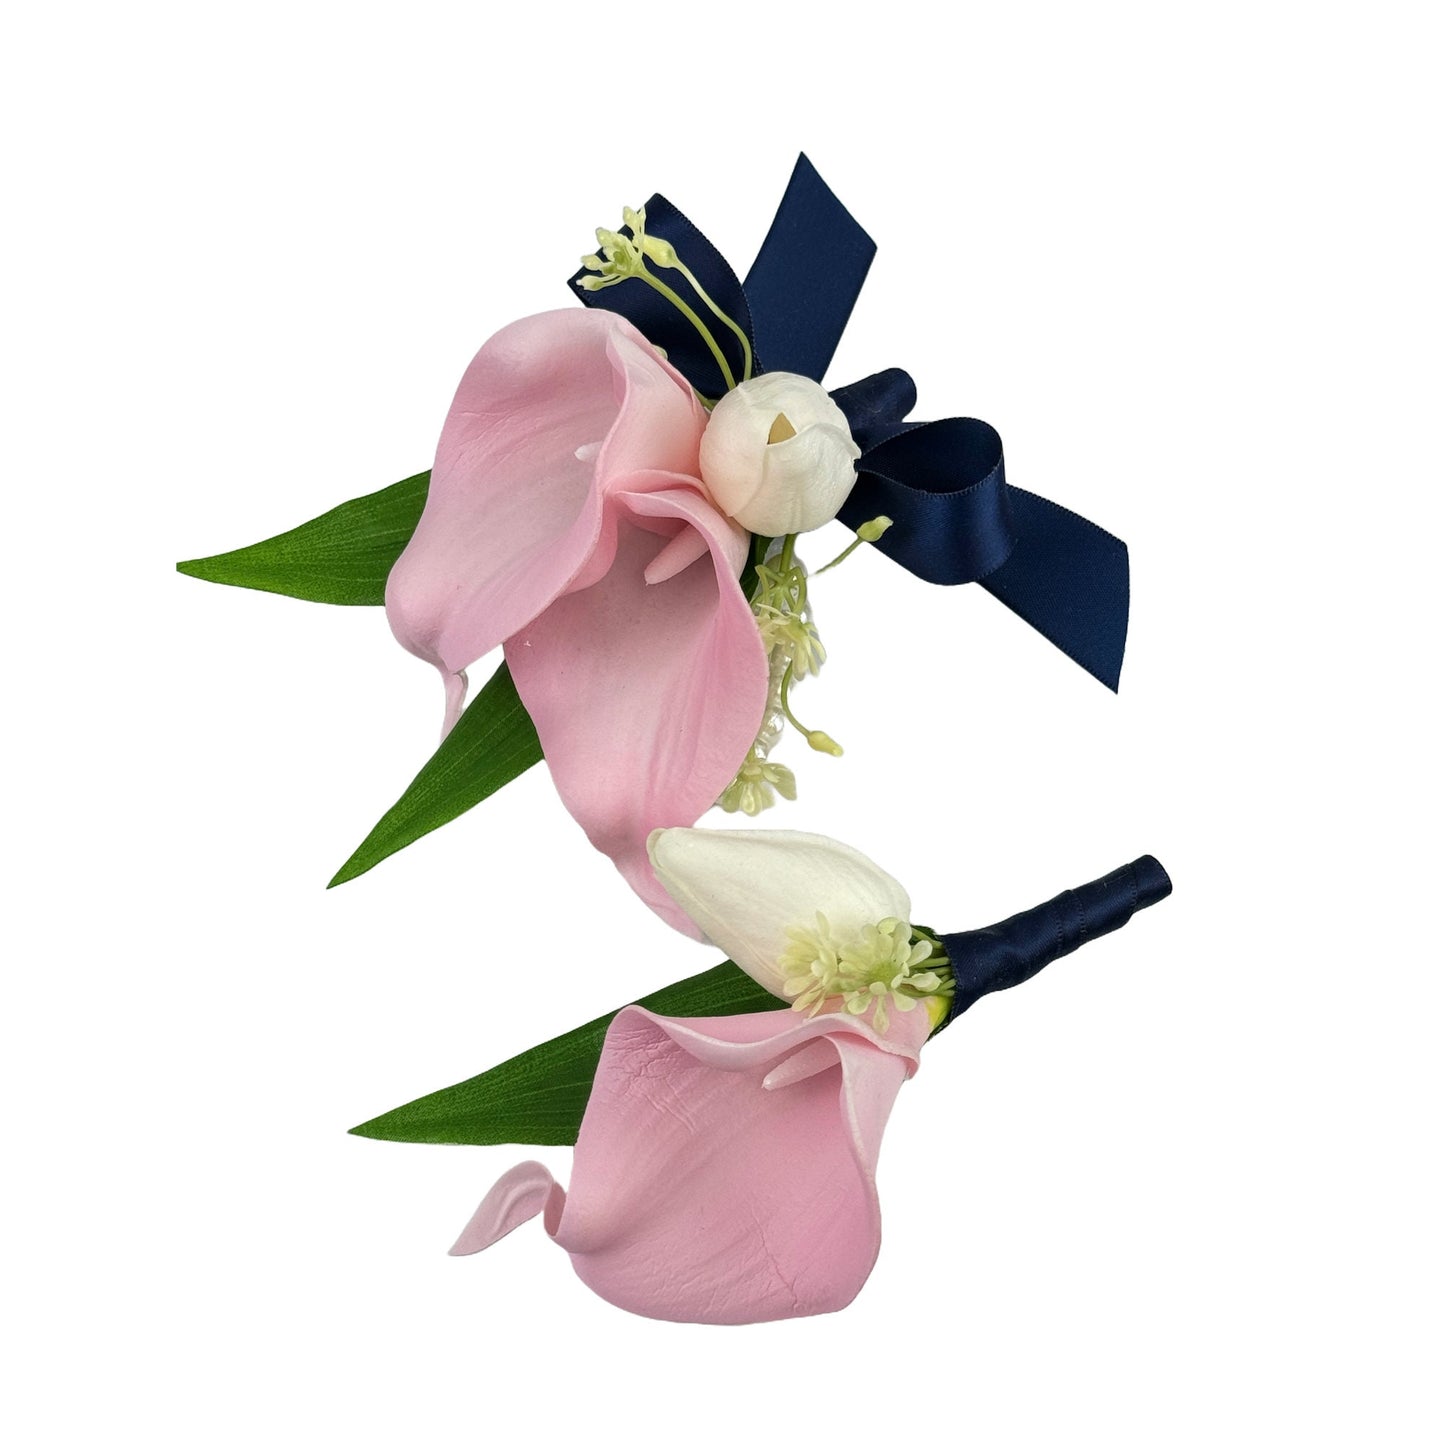 Luxury Artificial Calla Lily & Tulip Corsage/Boutonniere Set for Special Occasions